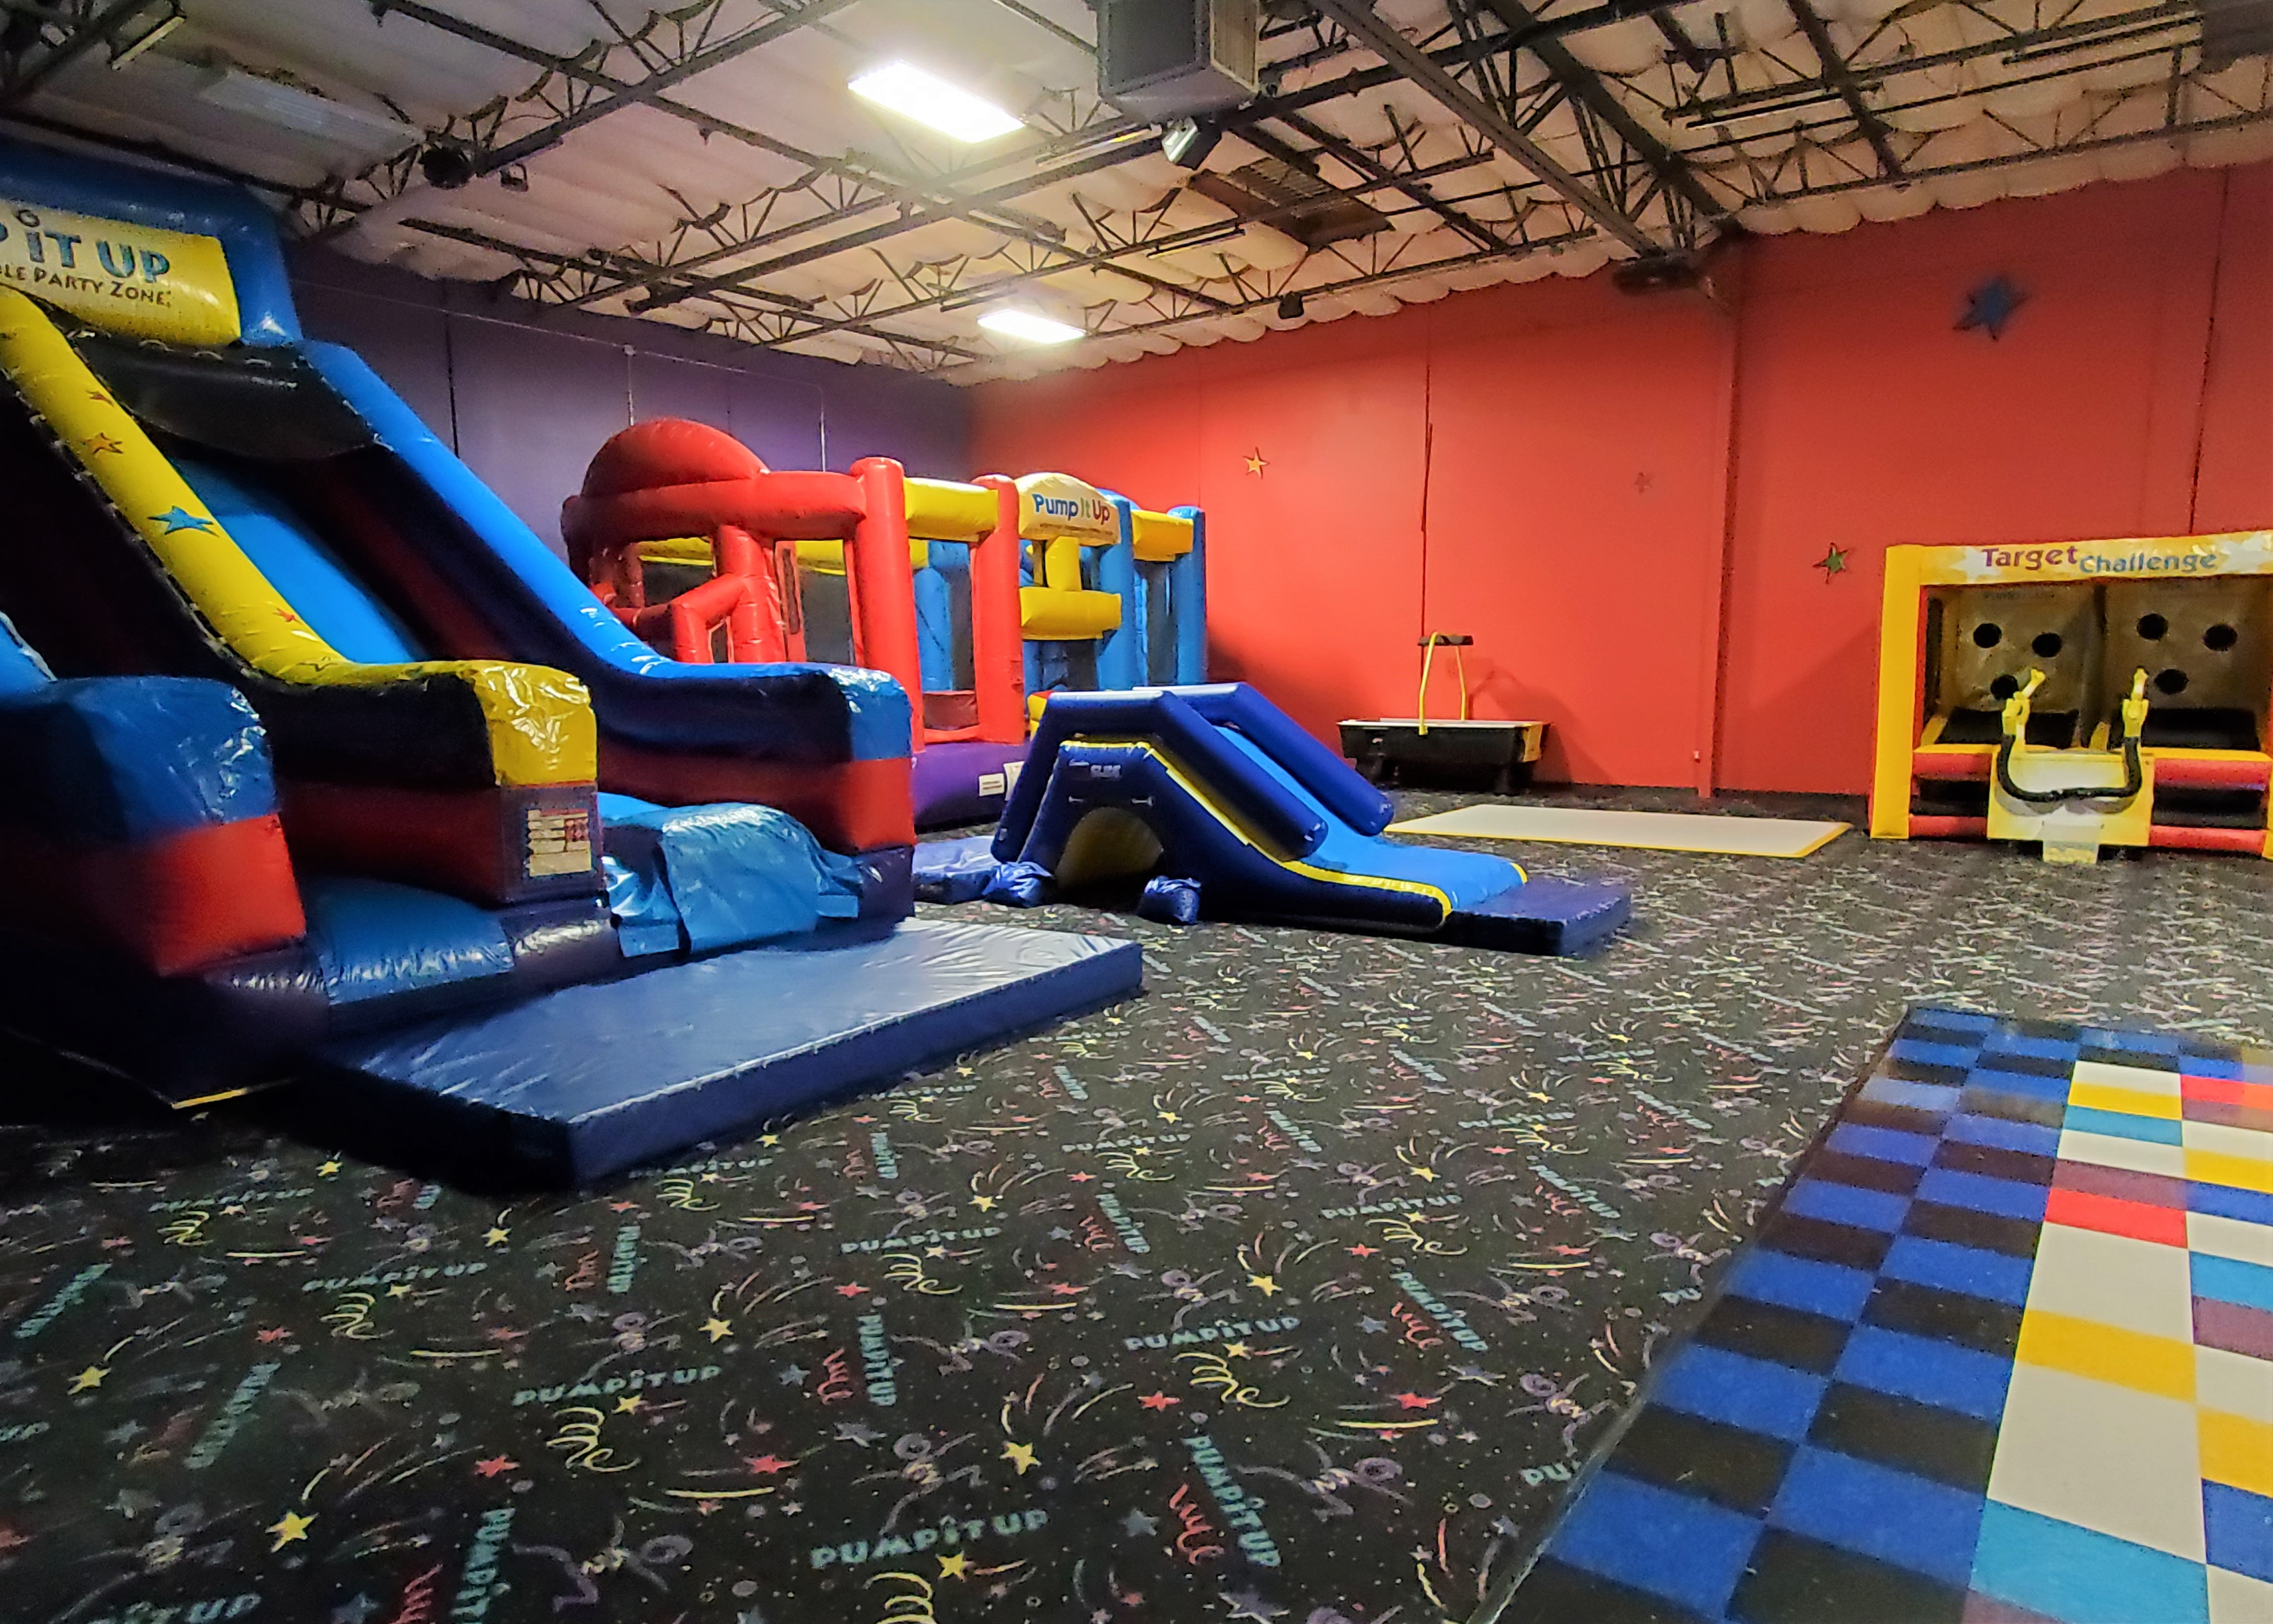 Pump It Up Oakland kids private birthday party indoor arena filled with inflatable attractions.